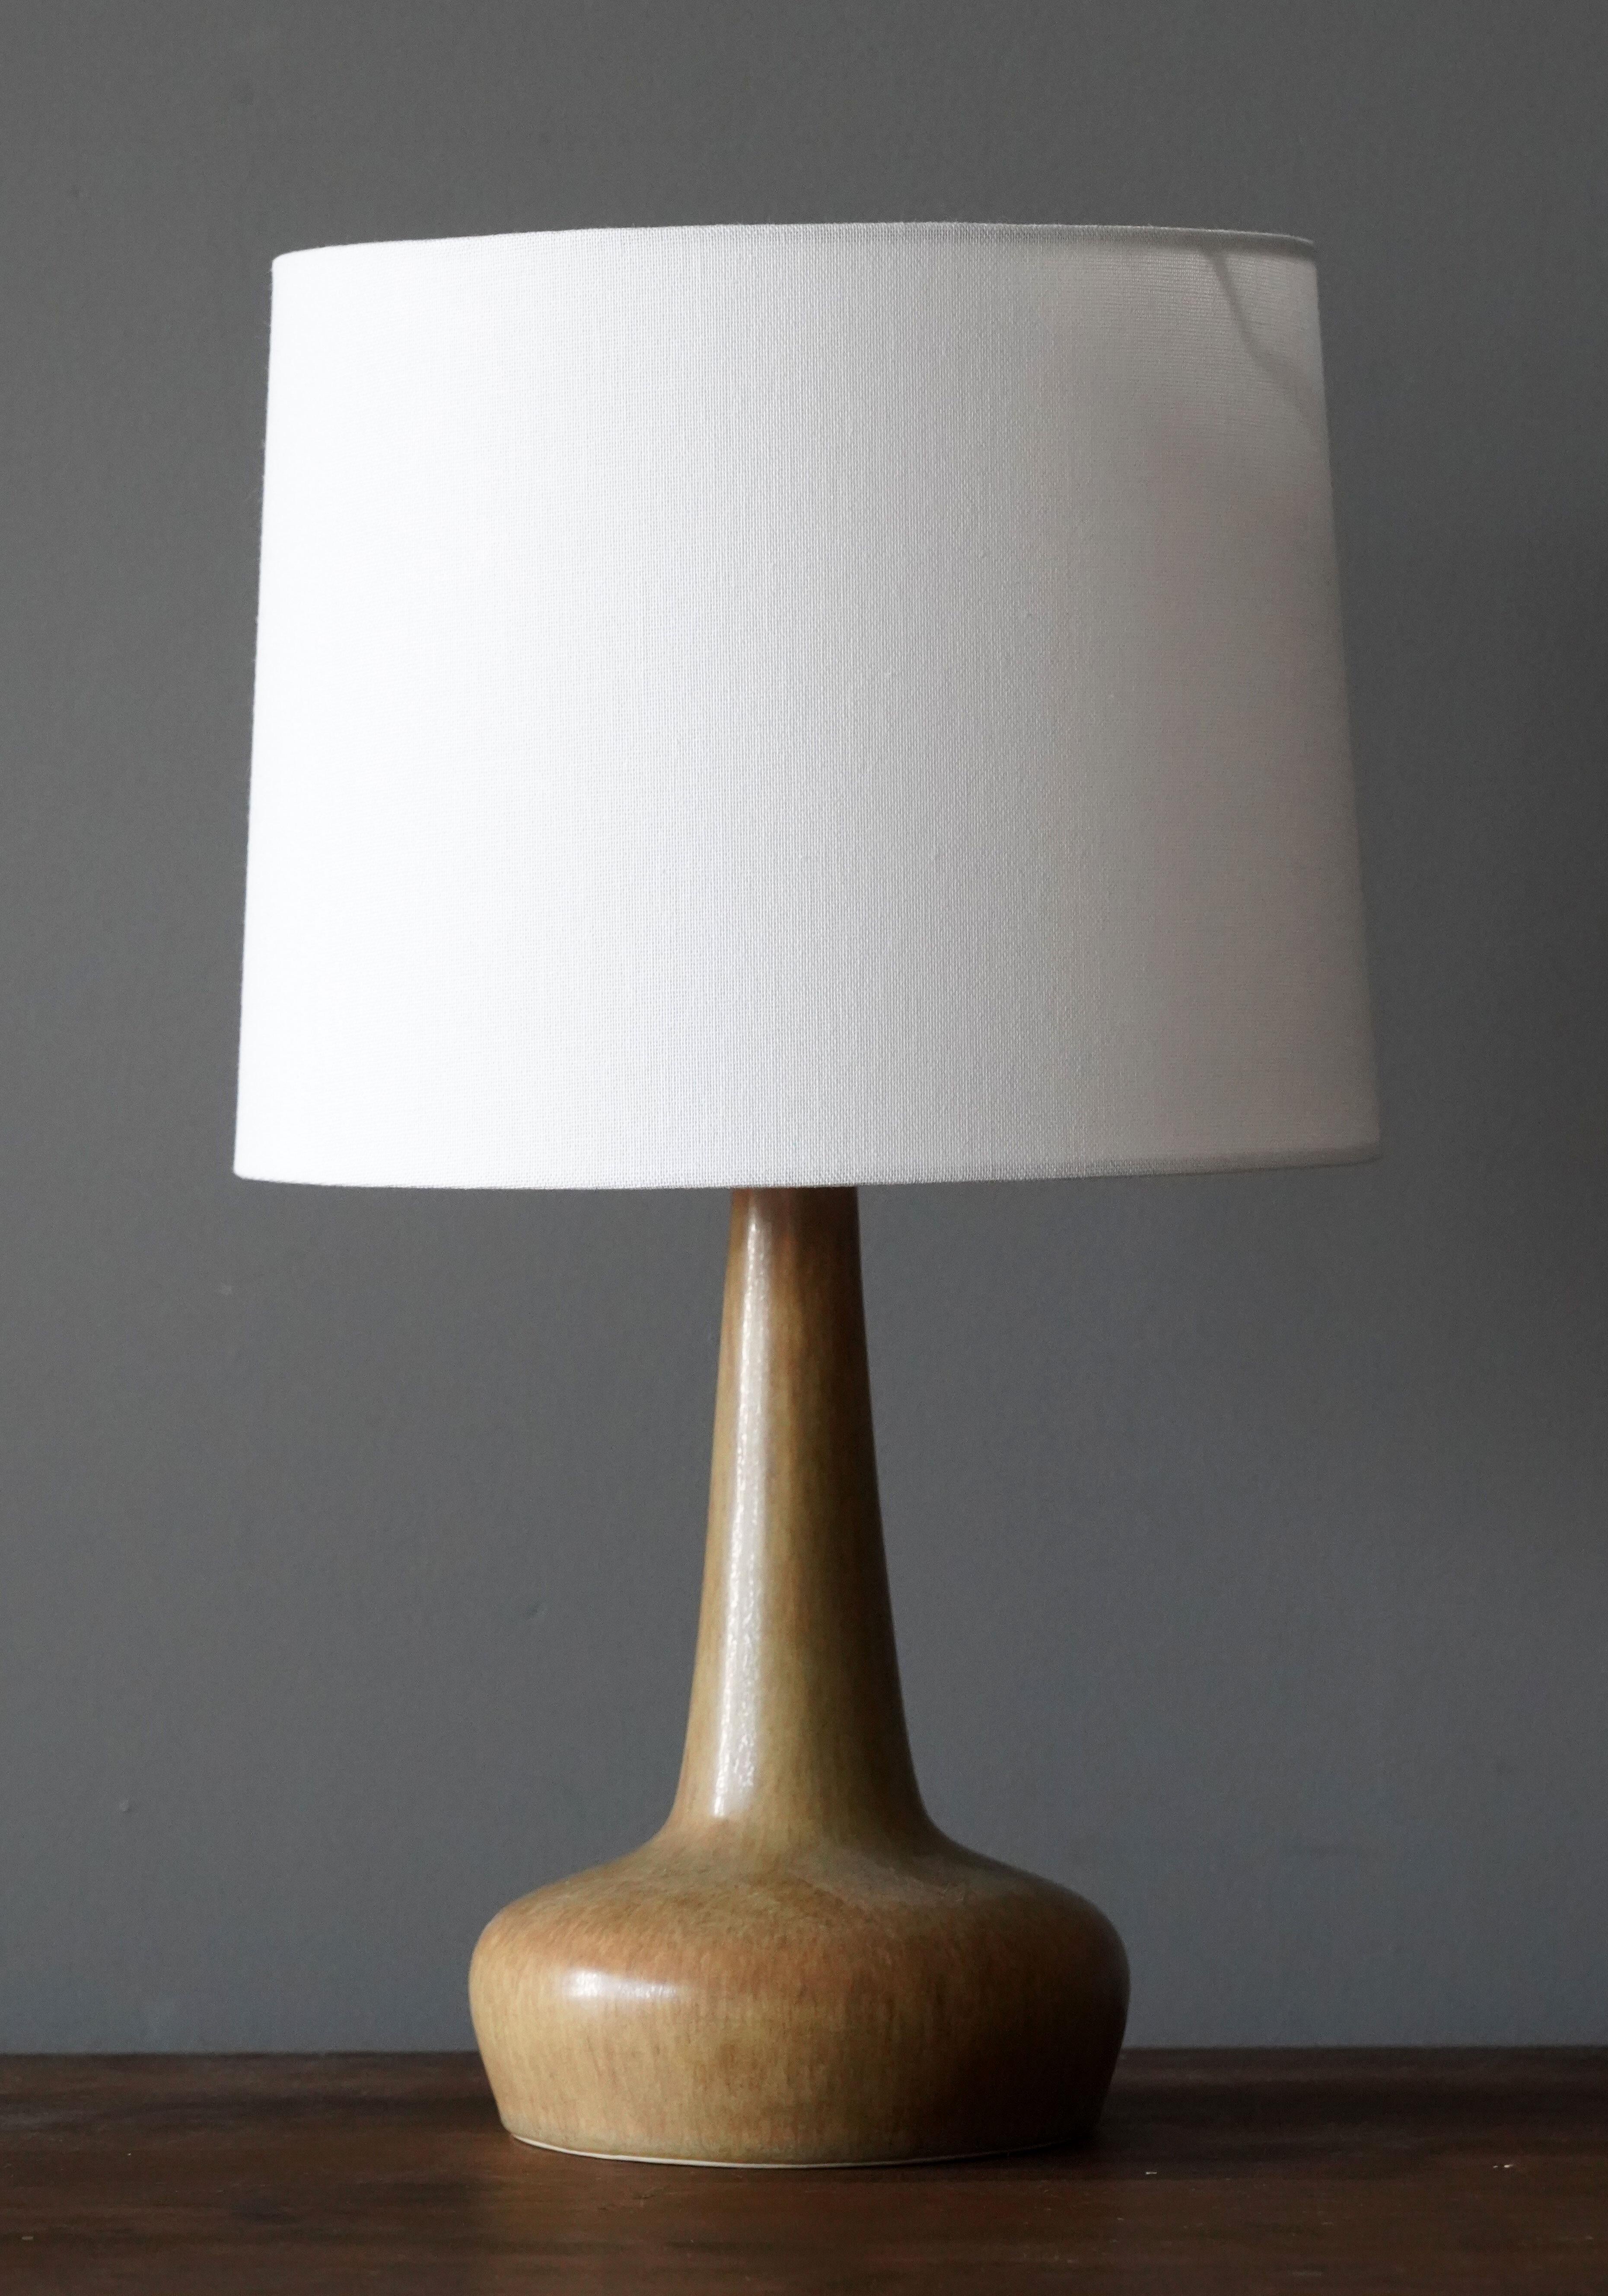 A table / desk lamp designed by husband and wife Per & Annelise Linneman-Schmidt. Hand cast in firesand. Produced in their own Studio, named Palshus, in Sengeløse, Denmark. Signed.

The lampshade is attached for reference and not included in the